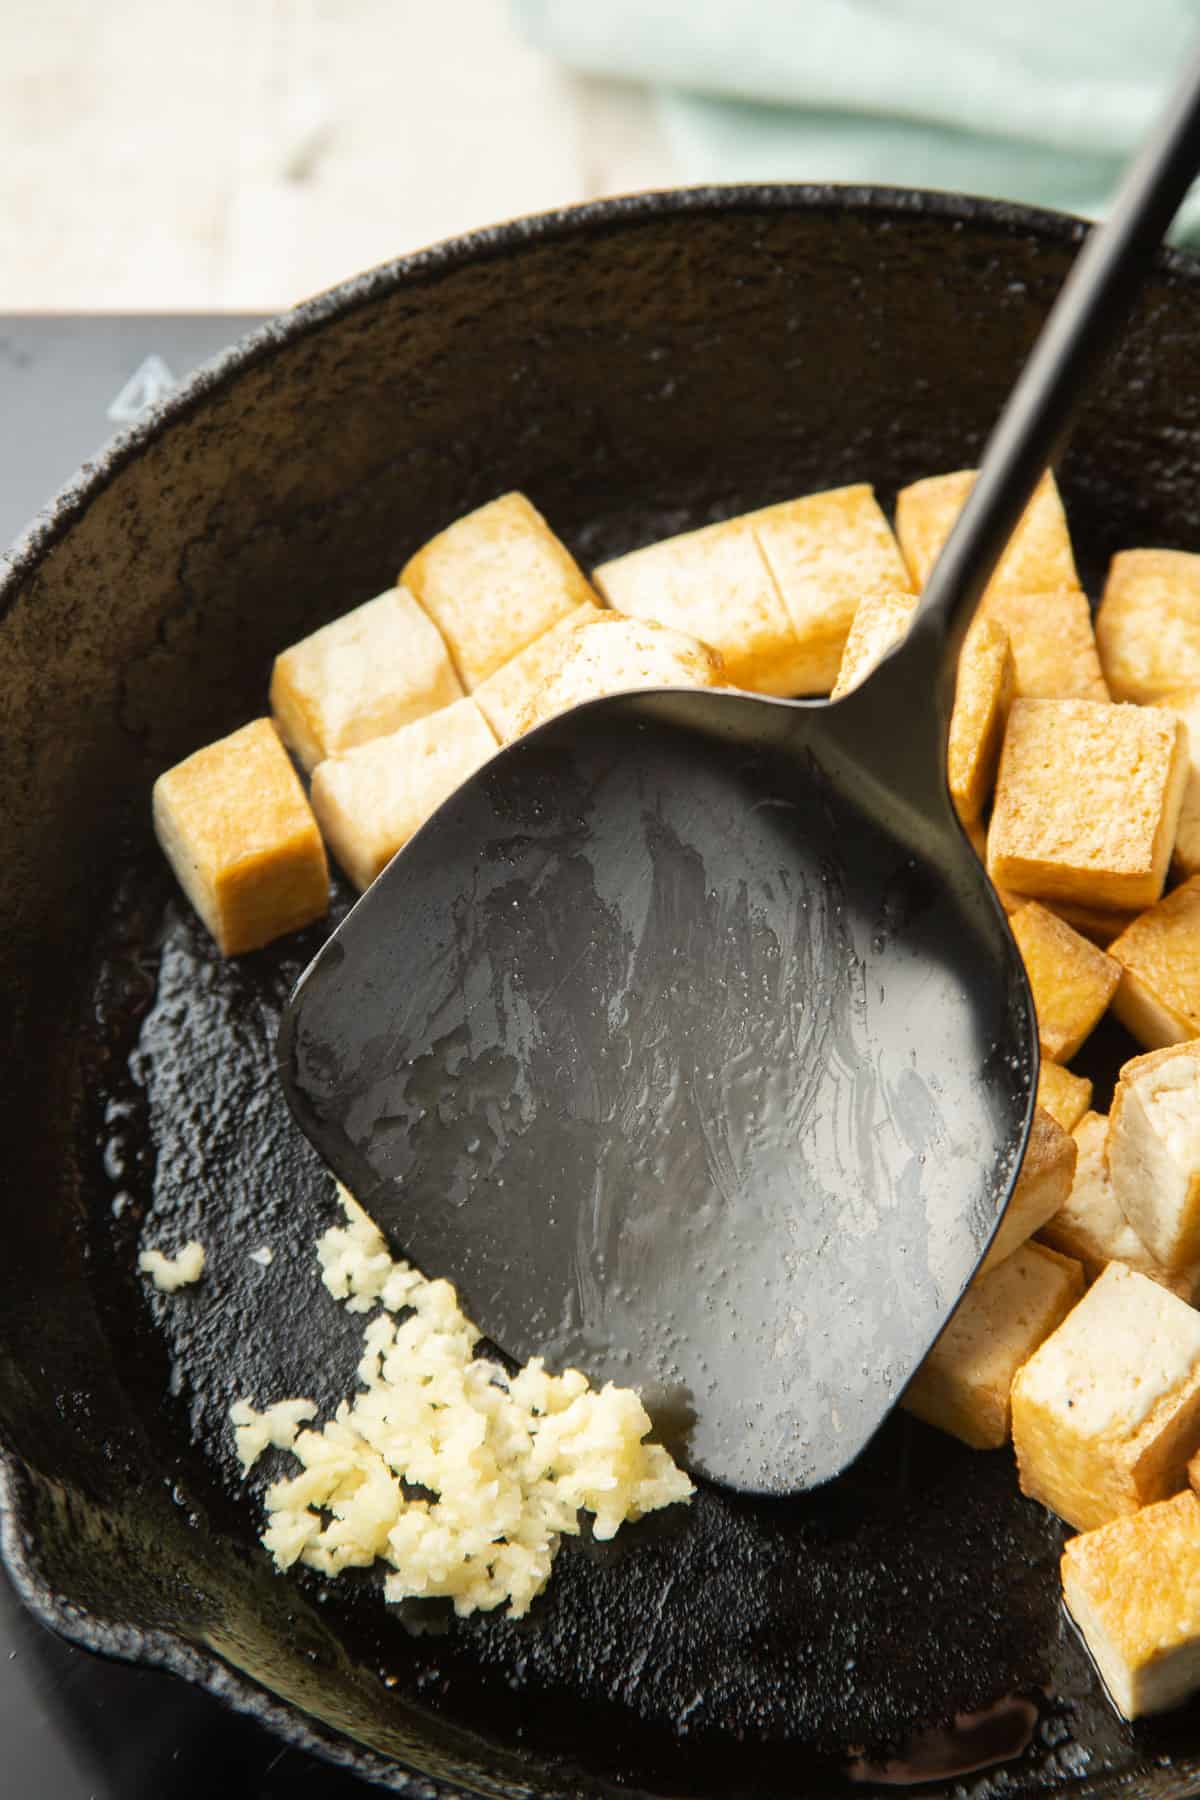 Minced garlic cooking in a skillet with tofu.